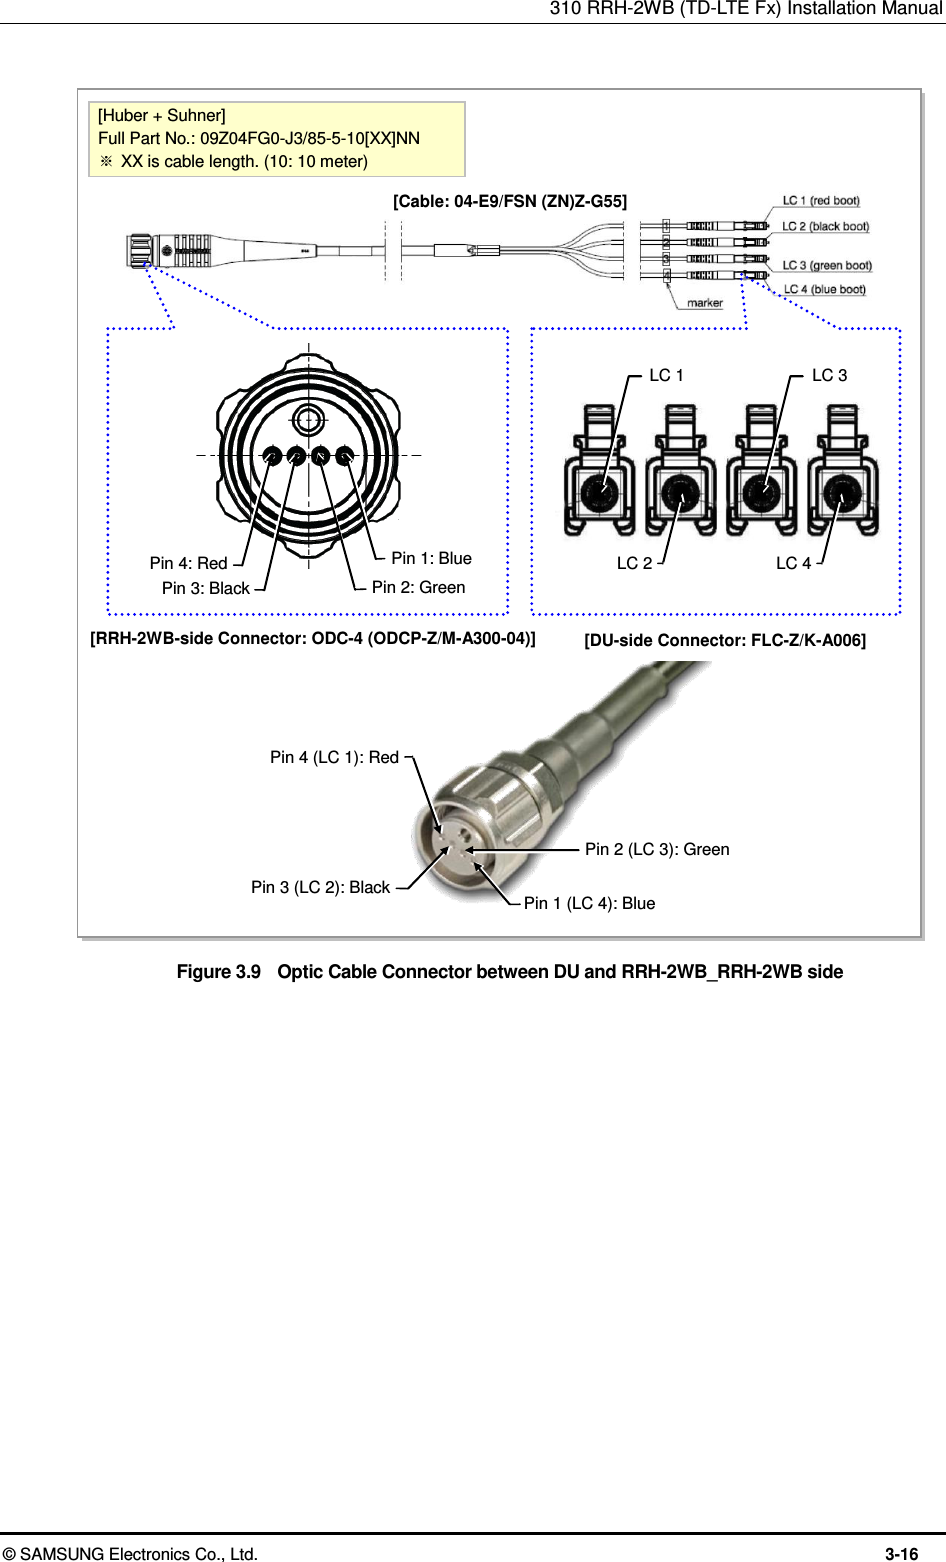 310 RRH-2WB (TD-LTE Fx) Installation Manual  © SAMSUNG Electronics Co., Ltd.  3-16  Figure 3.9    Optic Cable Connector between DU and RRH-2WB_RRH-2WB side   [RRH-2WB-side Connector: ODC-4 (ODCP-Z/M-A300-04)] [DU-side Connector: FLC-Z/K-A006] [Cable: 04-E9/FSN (ZN)Z-G55] [Huber + Suhner] Full Part No.: 09Z04FG0-J3/85-5-10[XX]NN ※ XX is cable length. (10: 10 meter)  LC 1 LC 3 LC 2 LC 4 Pin 1: Blue Pin 2: Green Pin 3: Black Pin 4: Red Pin 4 (LC 1): Red Pin 3 (LC 2): Black Pin 1 (LC 4): Blue Pin 2 (LC 3): Green 